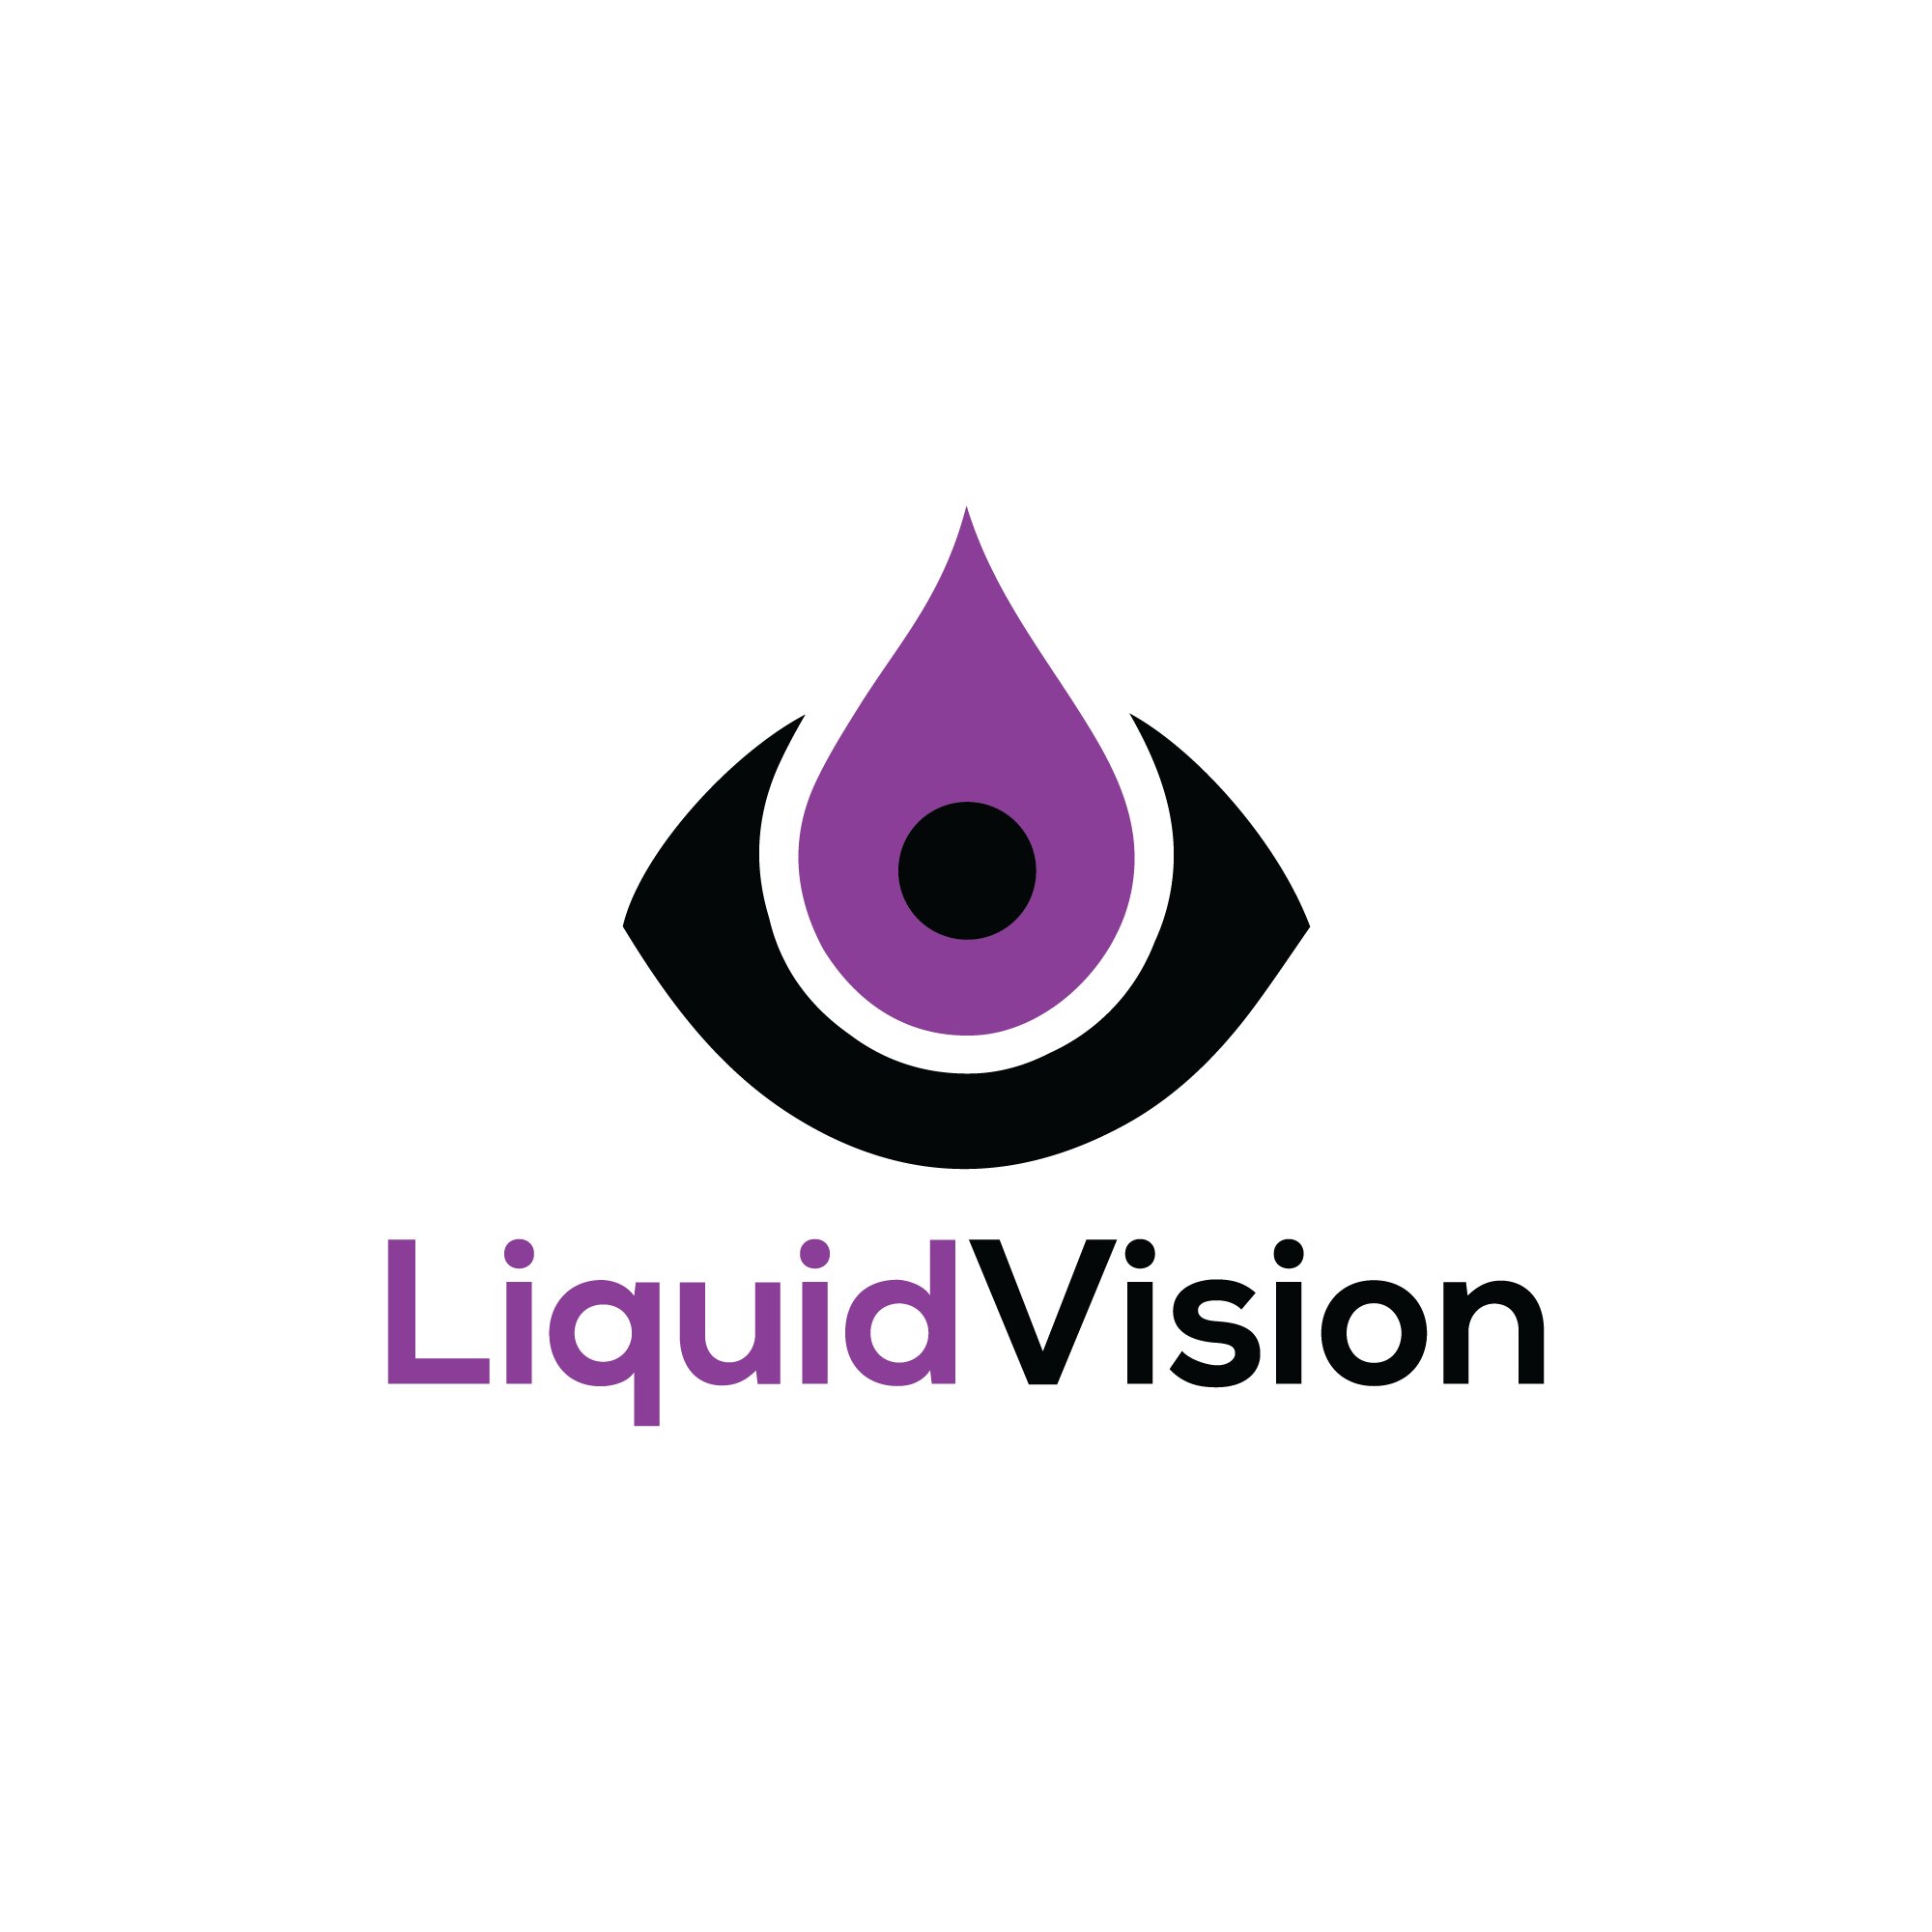 LVI is a SME with expertise in optical measurement, in situ real time analysis of fluids and sensor engineering and integration.